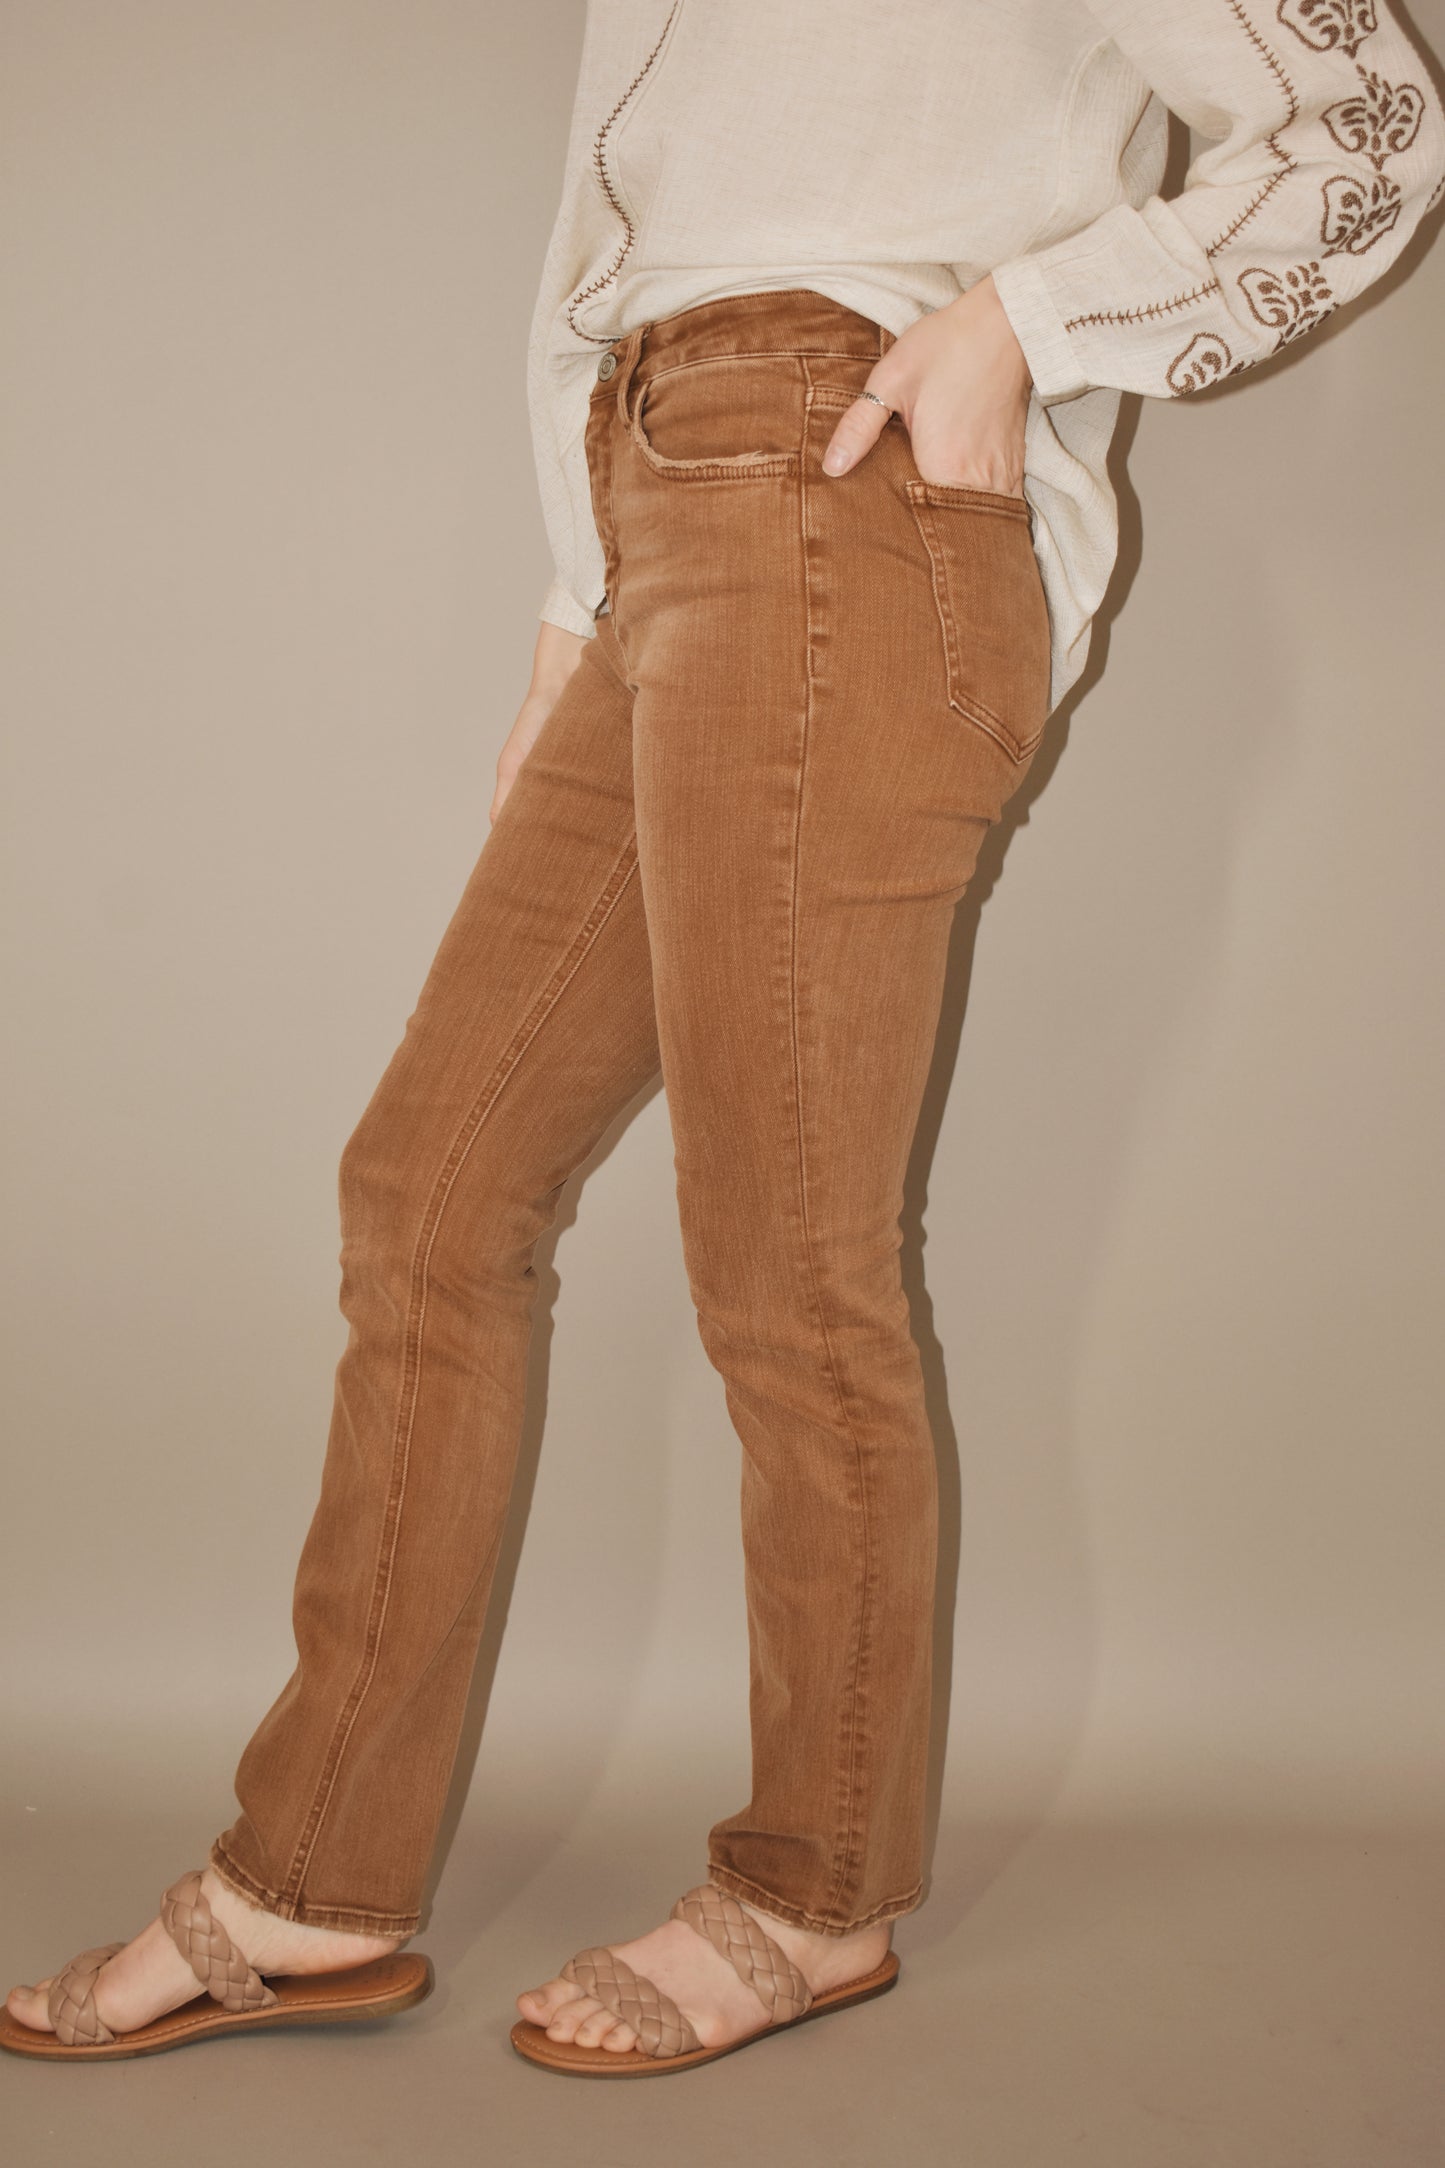 Toffee colored denim. Stretch denim. High waisted. Slim straight leg, full length. No holes or distressing. Zip and button enclosure. 